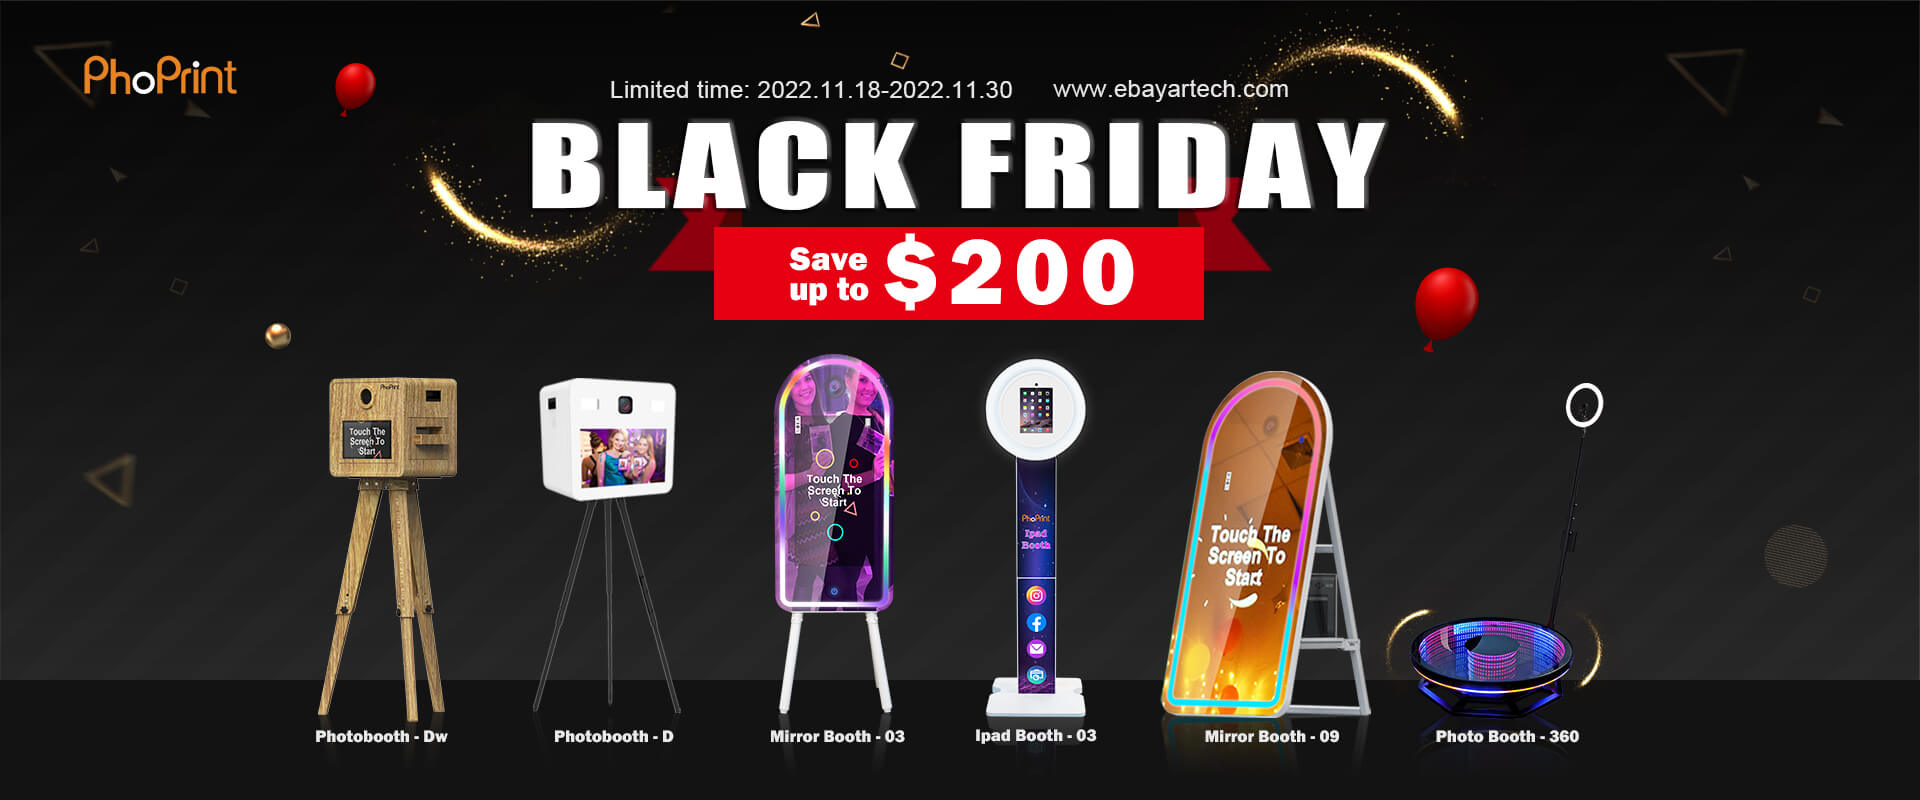 black friday save up to $200